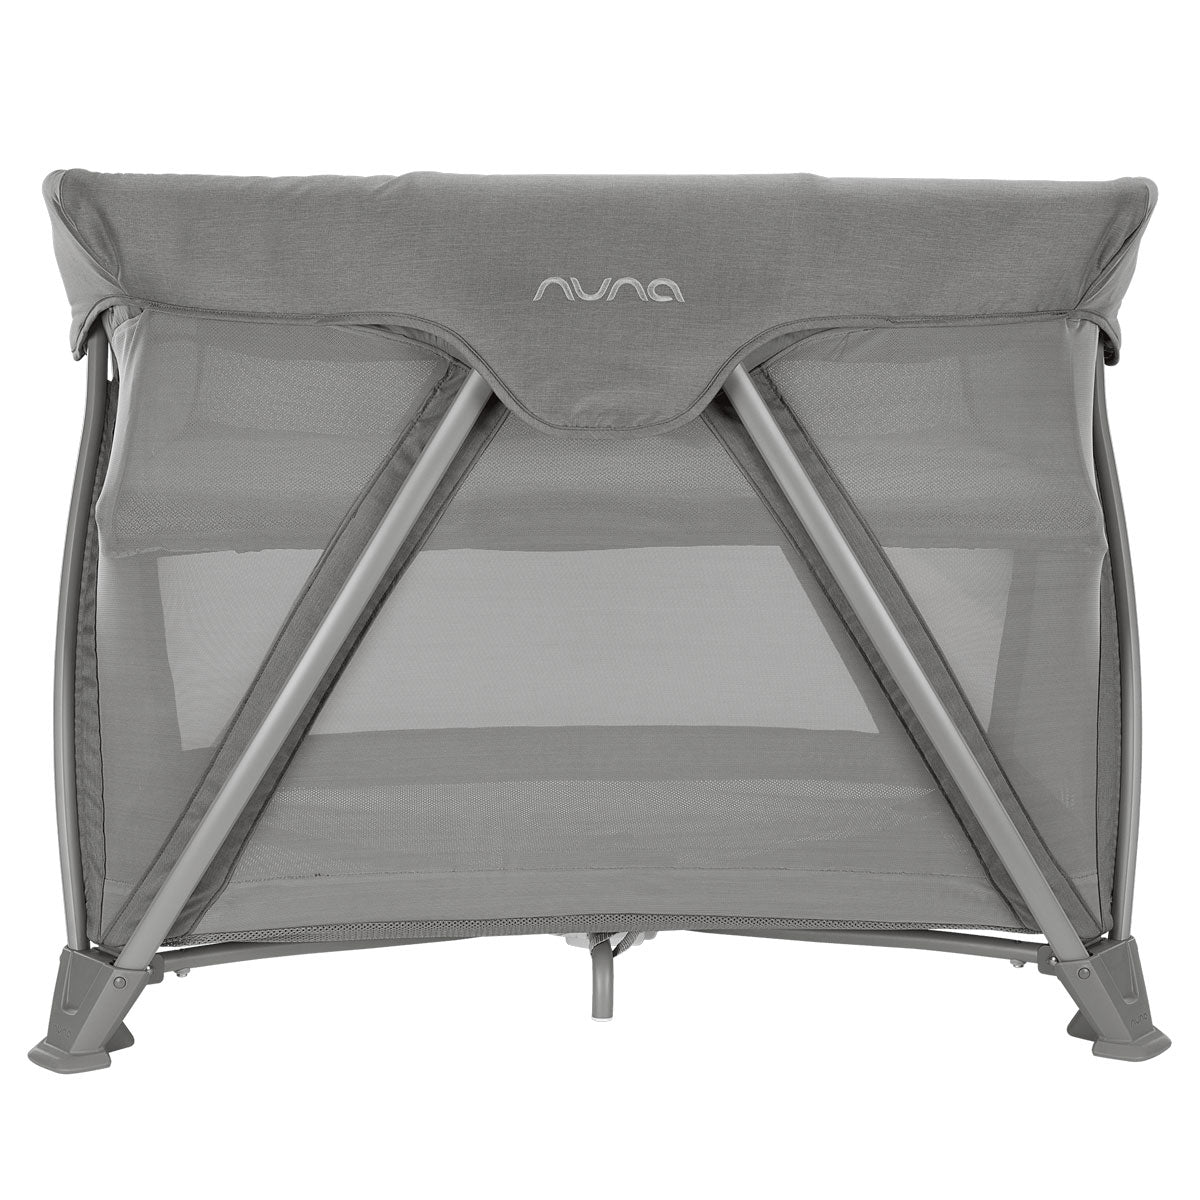 Nuna COVE Aire Go Play Yard - Frost